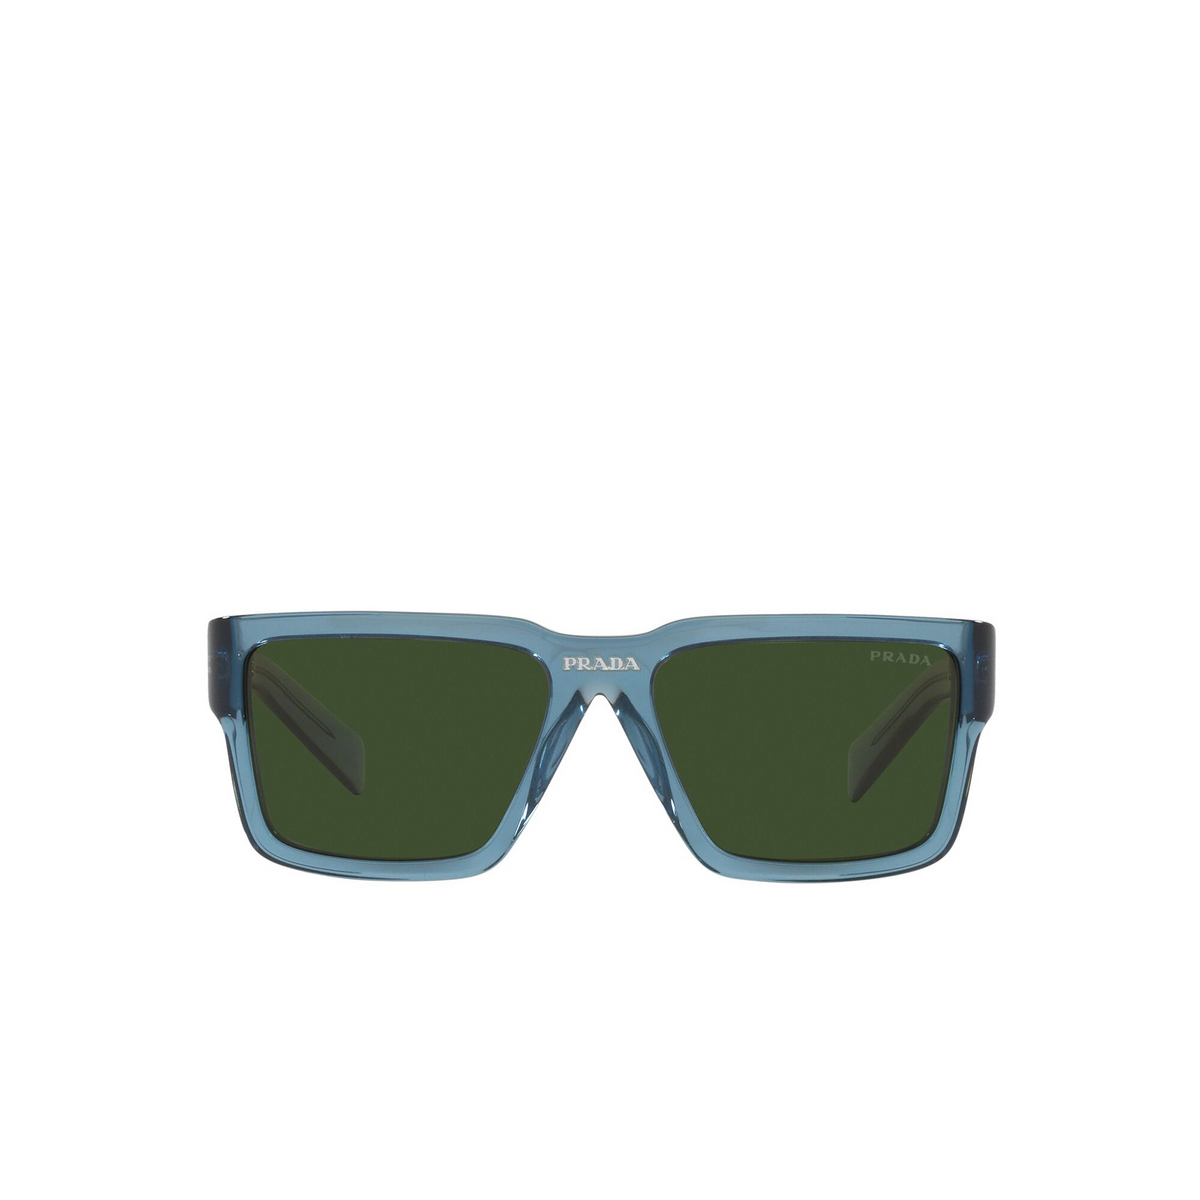 Prada® Rectangle Sunglasses: PR 10YS color Astral Crystal 01X1I0 - front view.